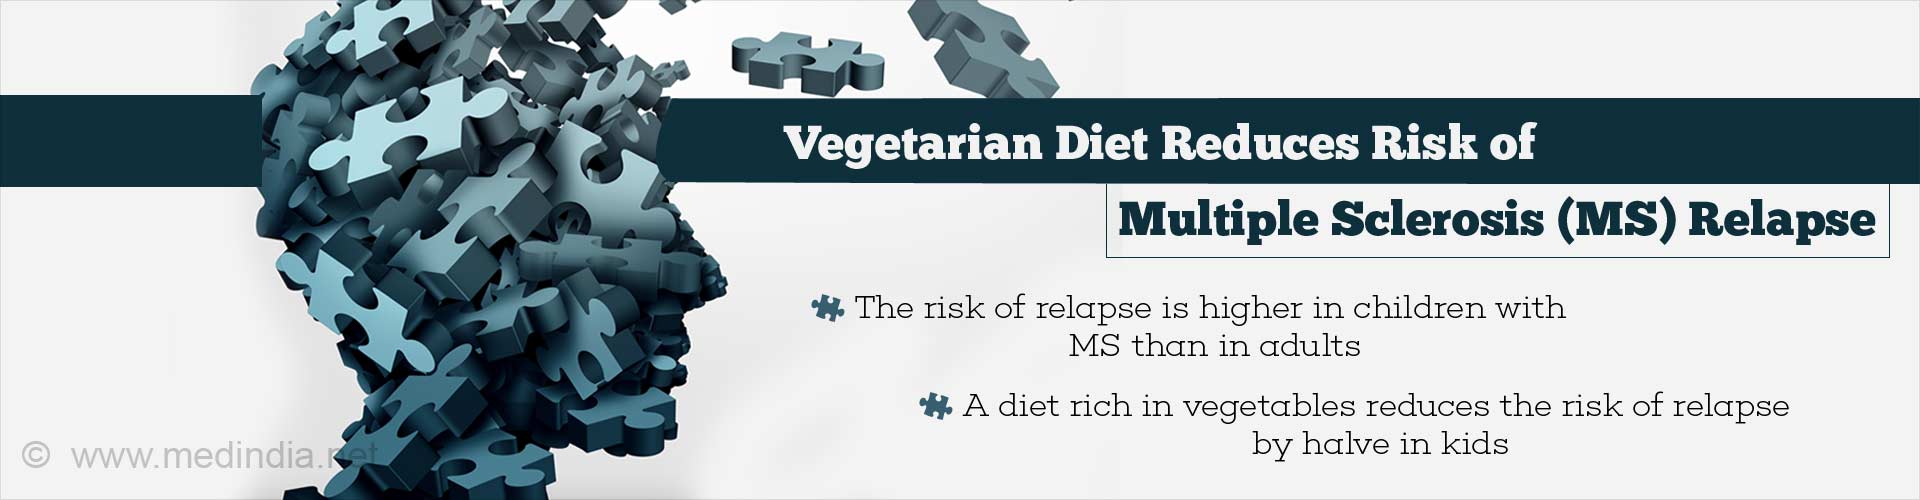 Vegetarian Diet Reduces Risk of Multiple Sclerosis (MS) Relapse
- The risk of relapse is higher in children with MS than in adults
- A diet rich in vegetables reduces the risk of relapse to halve in kids